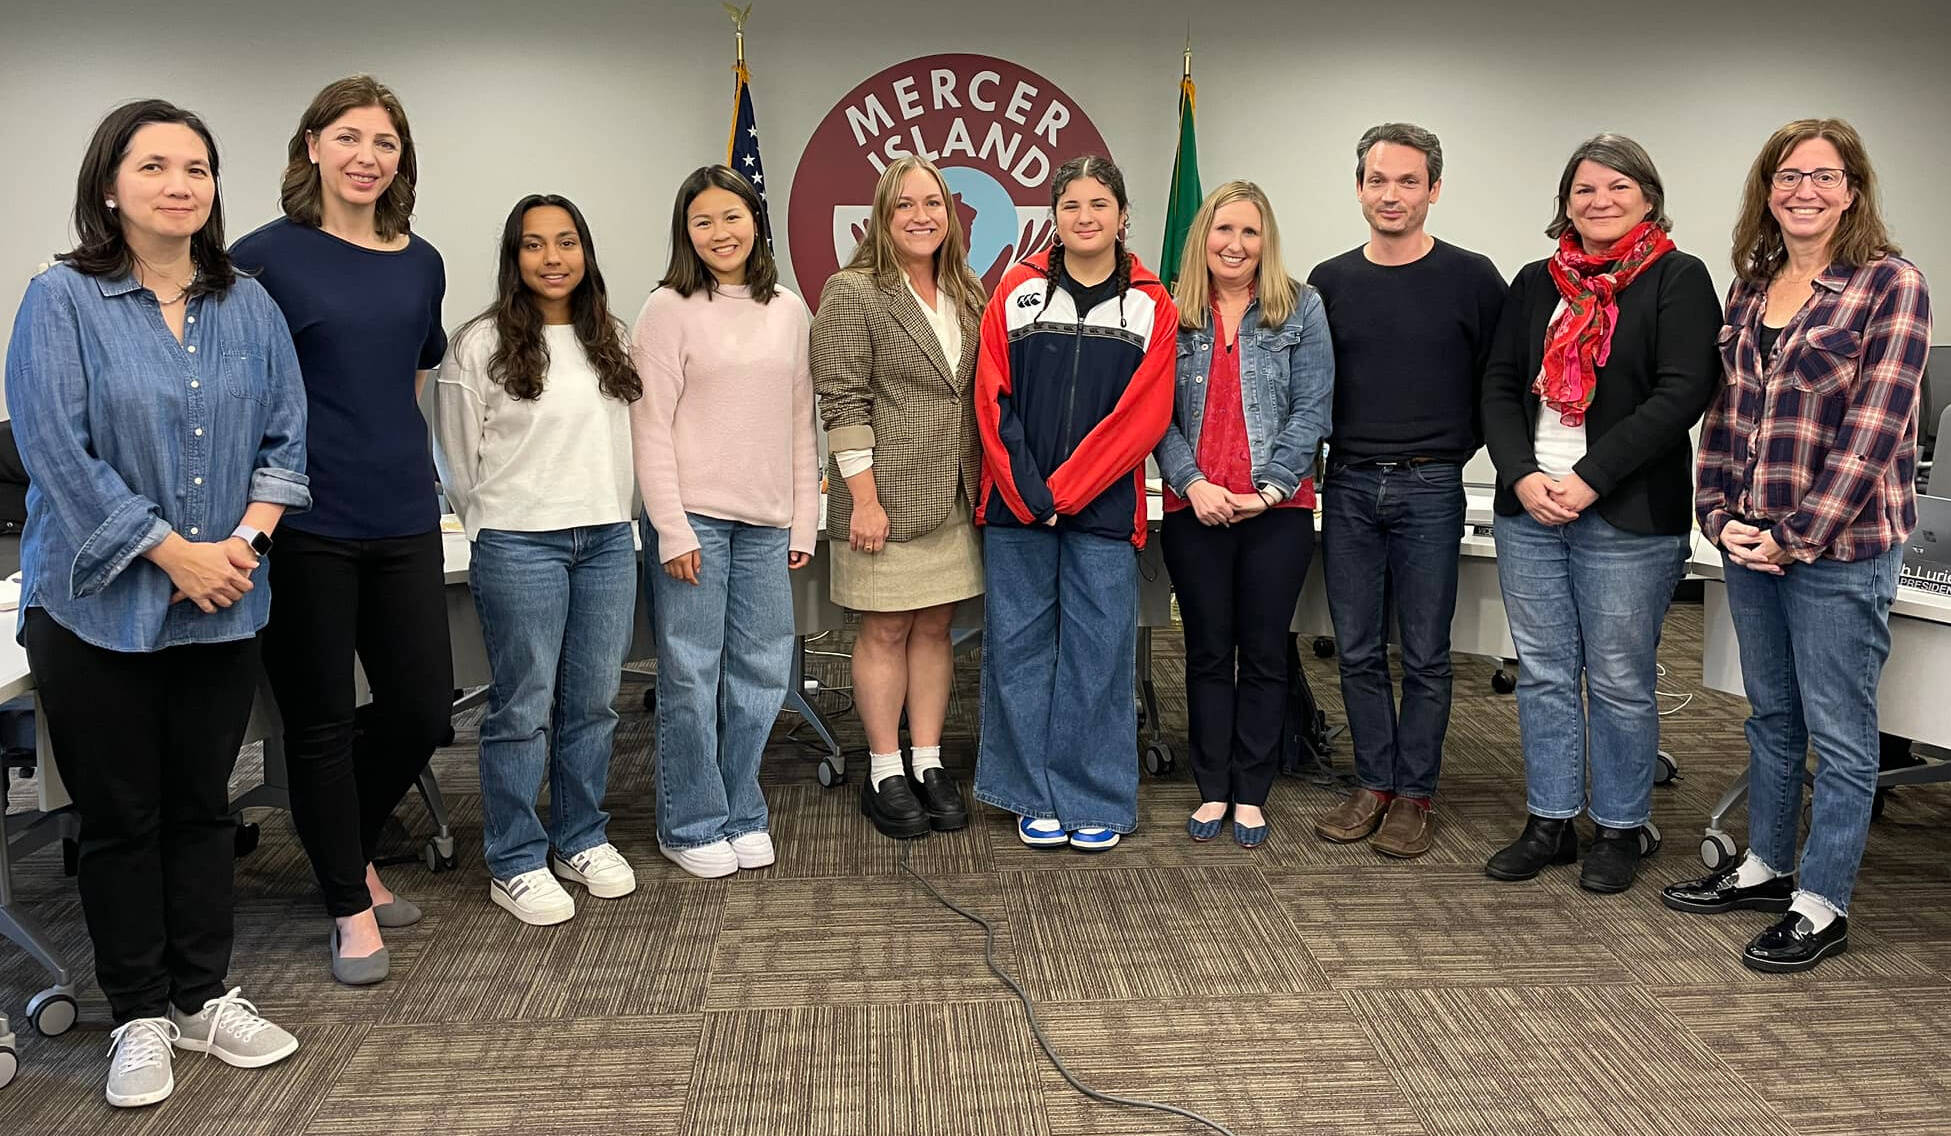 Islander Middle School eighth-grader Abigail Nissim (middle) is flanked by her language arts teacher Whitney Swope and school co-principal MaryJo Budzius as they join the school board directors at their March 14 meeting. Photo courtesy of the Mercer Island School District